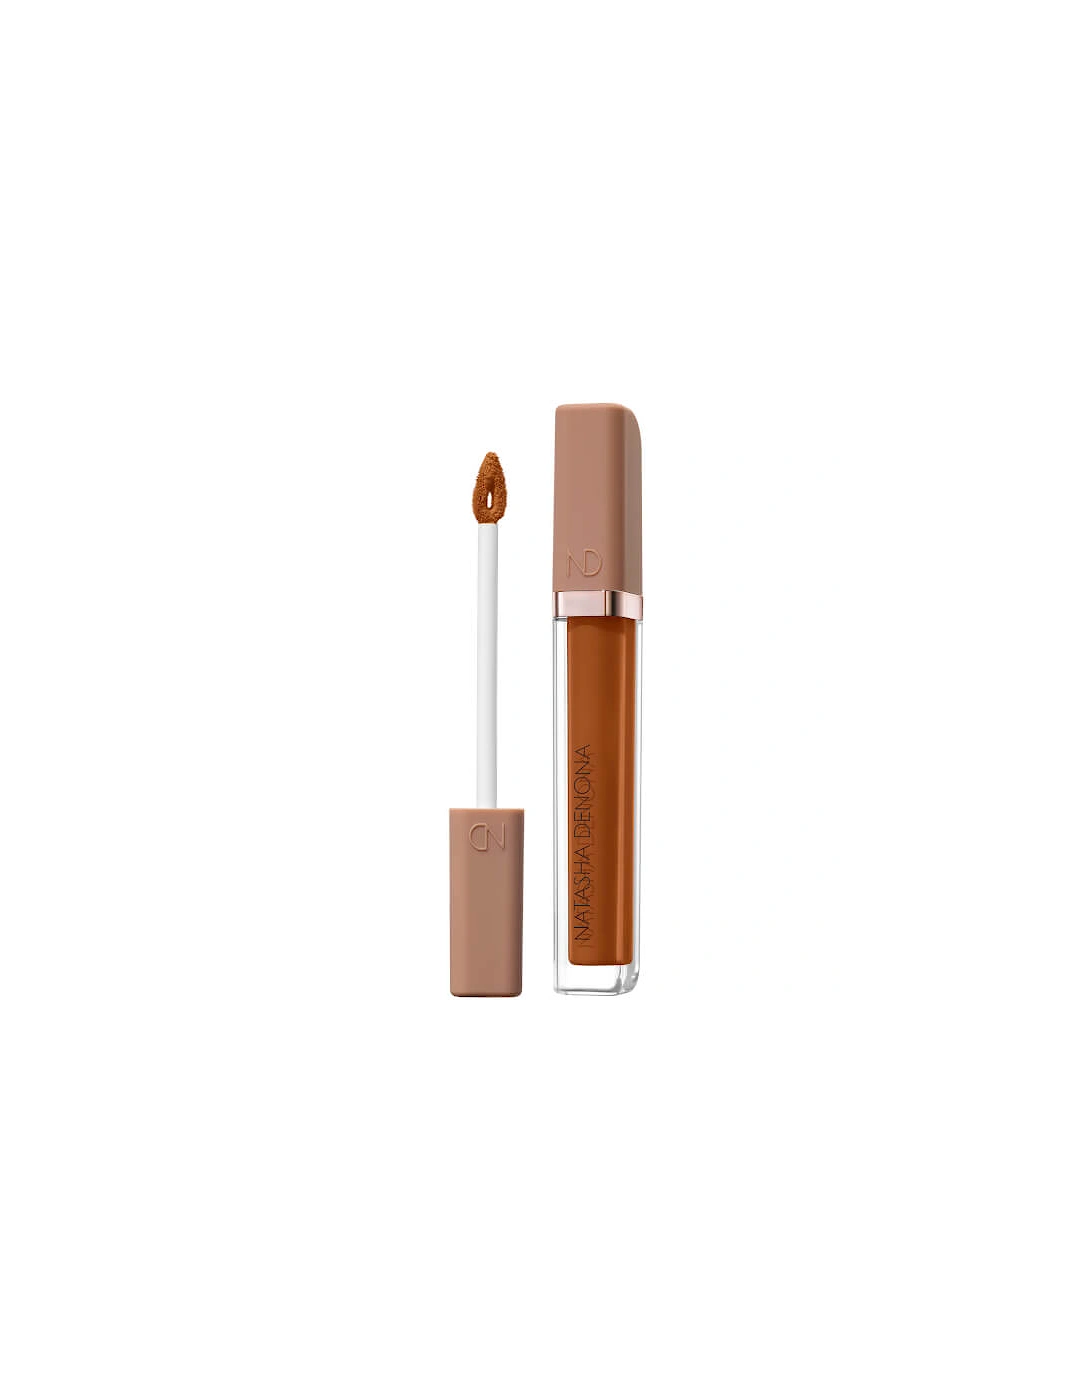 Hy-Glam Concealer - P9, 2 of 1